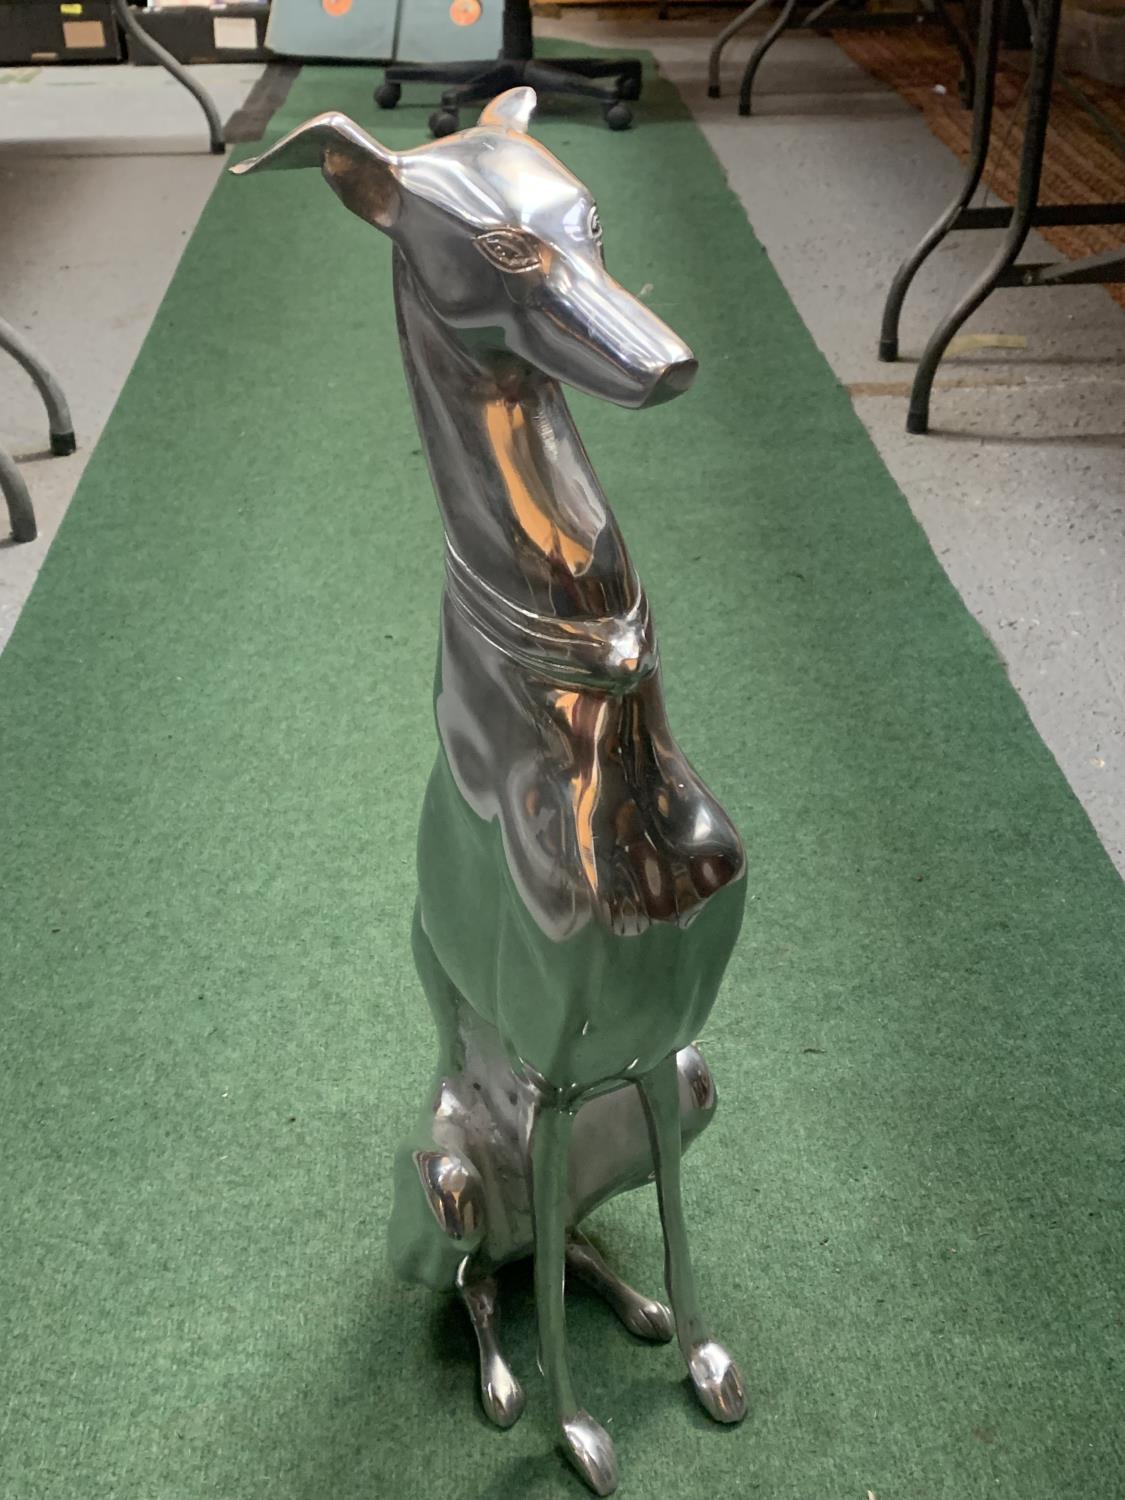 A LARGE CHROME GREYHOUND IN A SITTING POSITION 70CM HIGH - Image 2 of 3